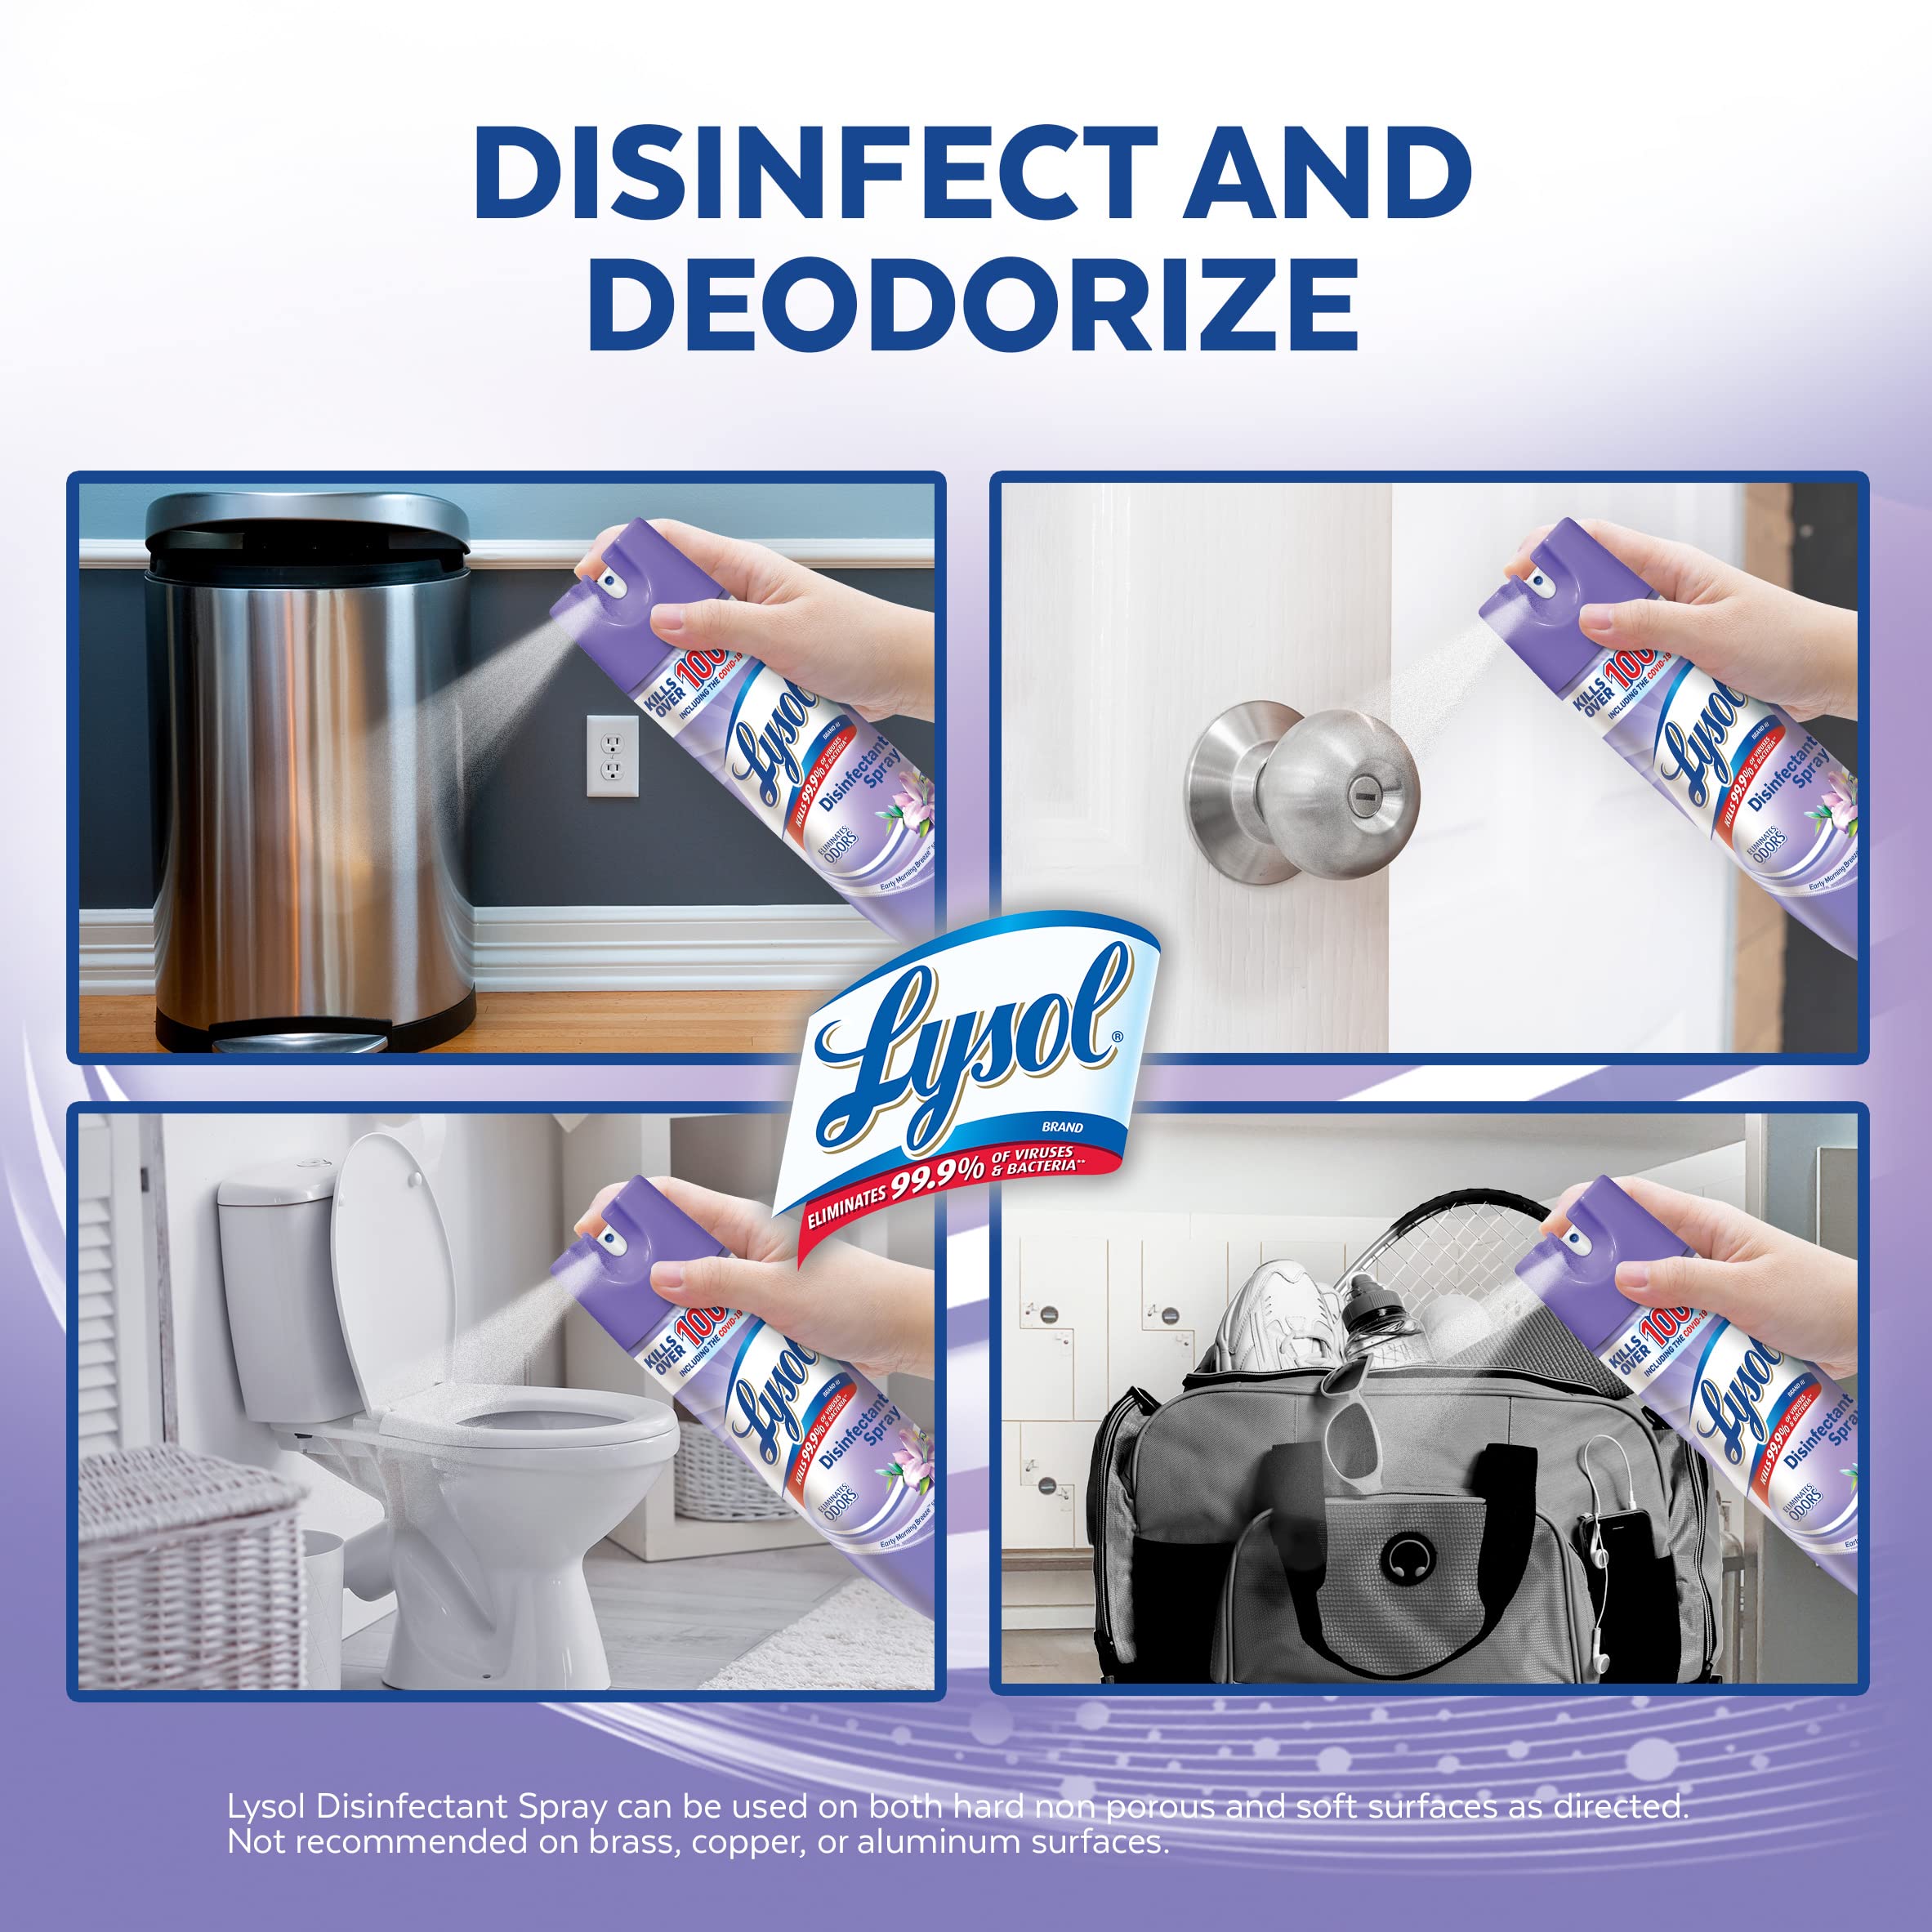 Lysol Disinfectant Spray, Sanitizing And Antibacterial Spray, For Disinfecting And Deodorizing, Early Morning Breeze, 19 Fl Oz (Pack Of 2), Packaging May Vary